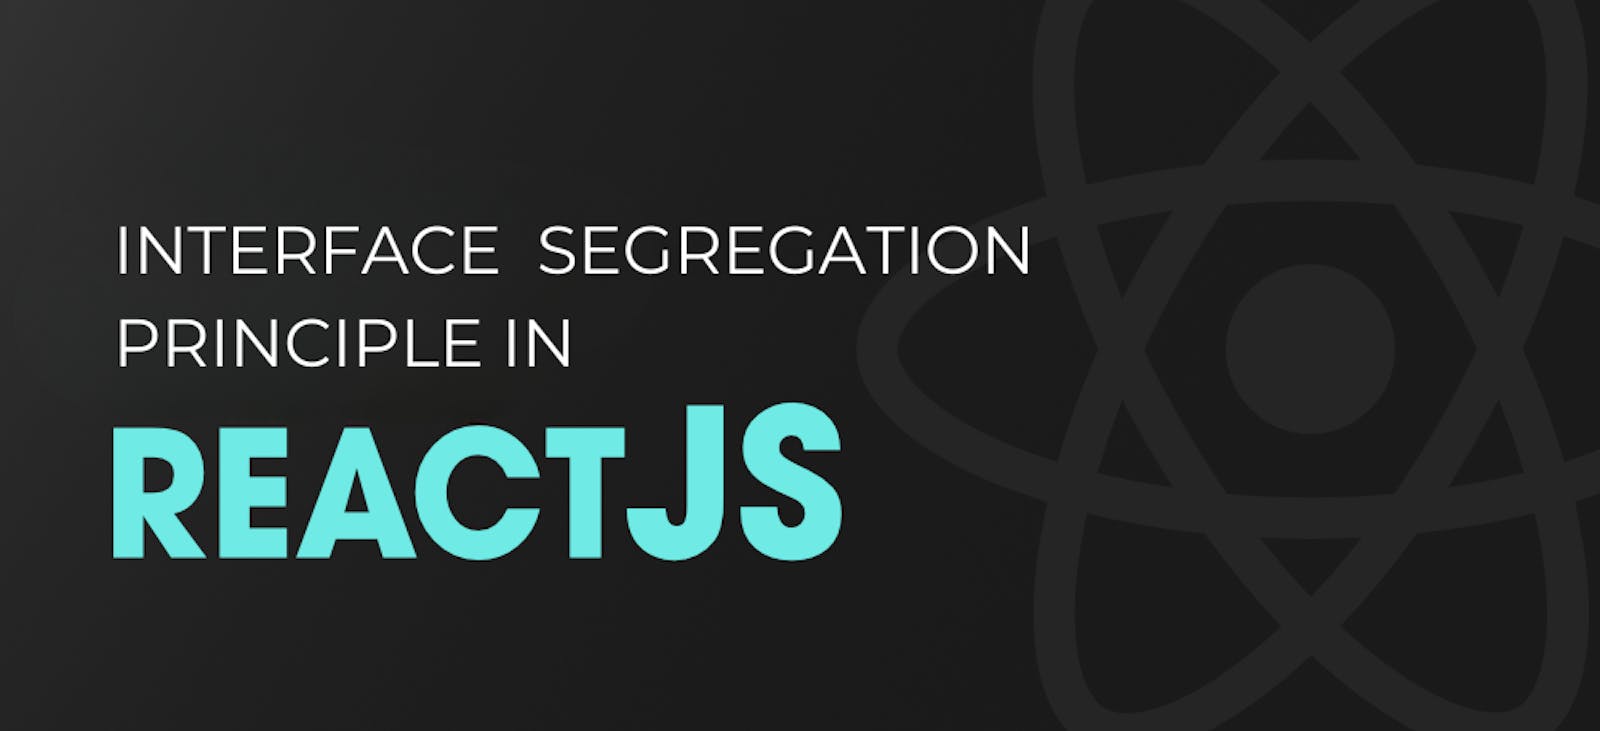 Using the Interface Segregation Principle (ISP) in React